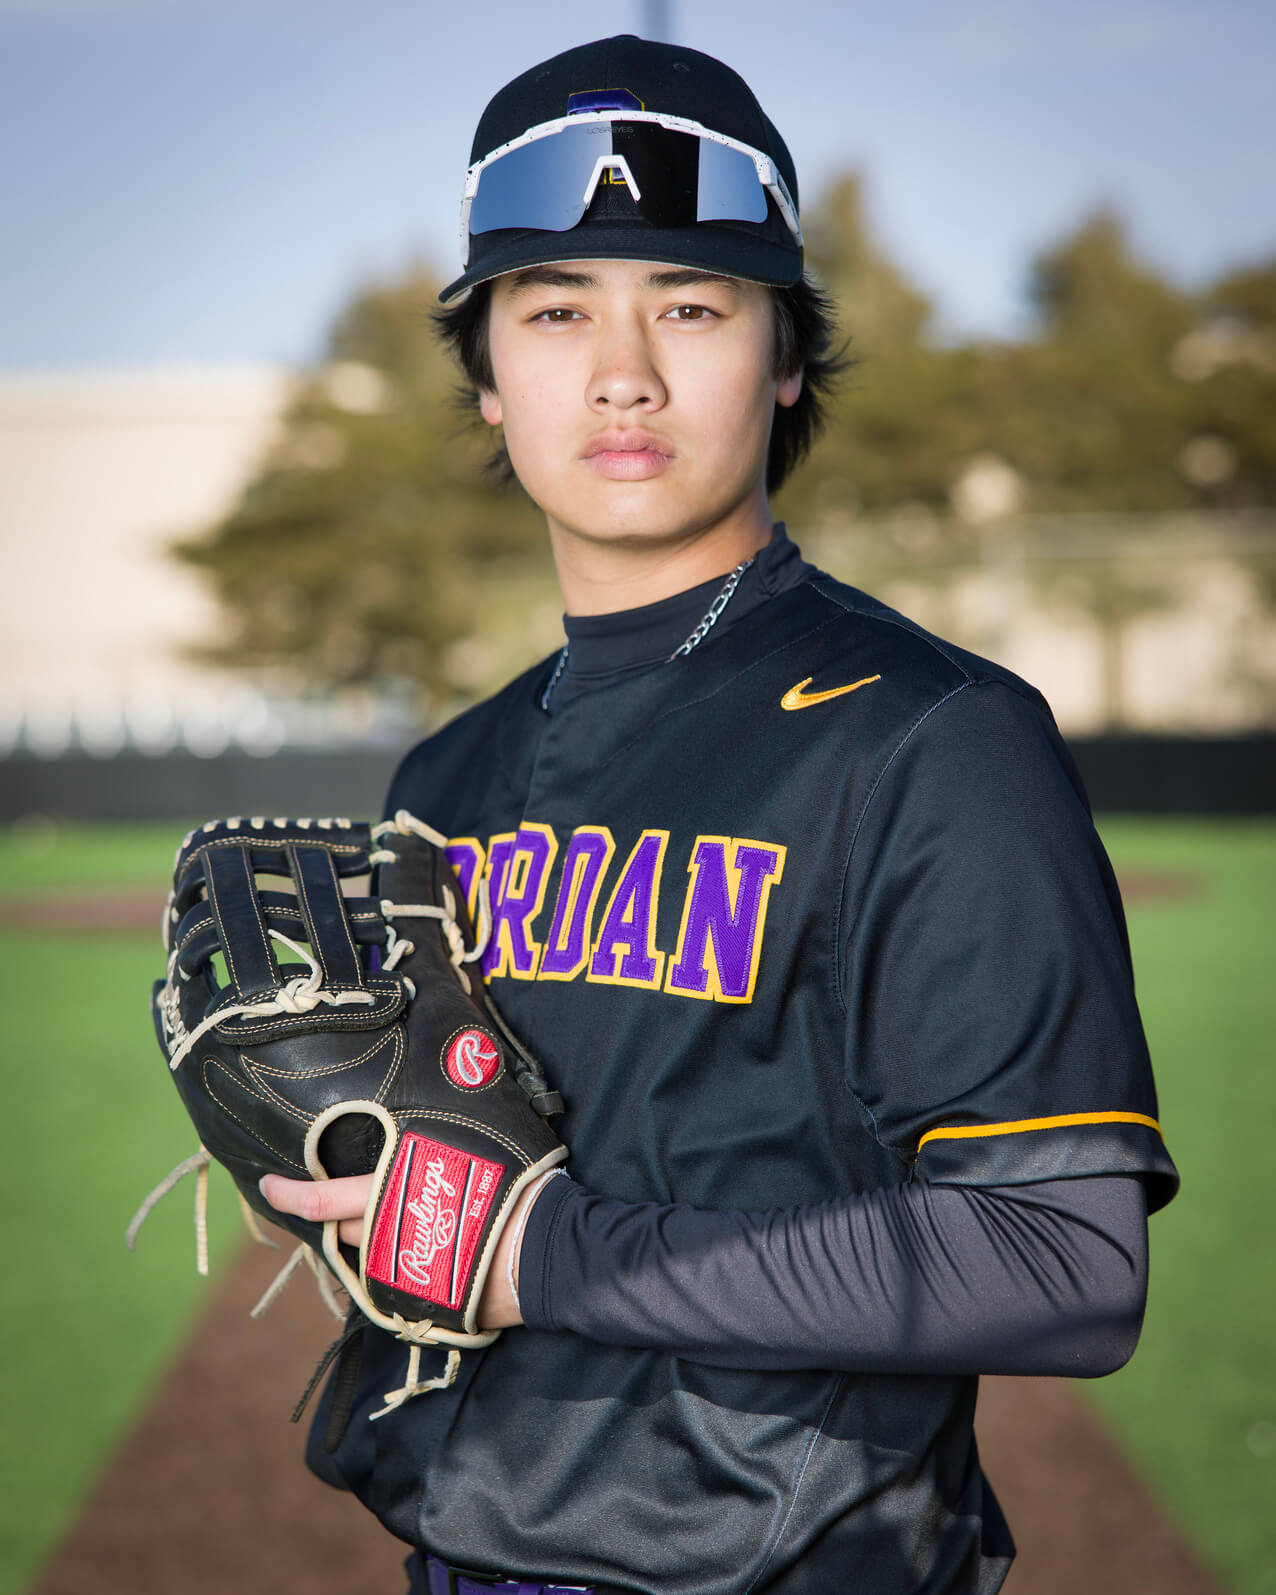 High school baseball portraits and photography for California athletic teams